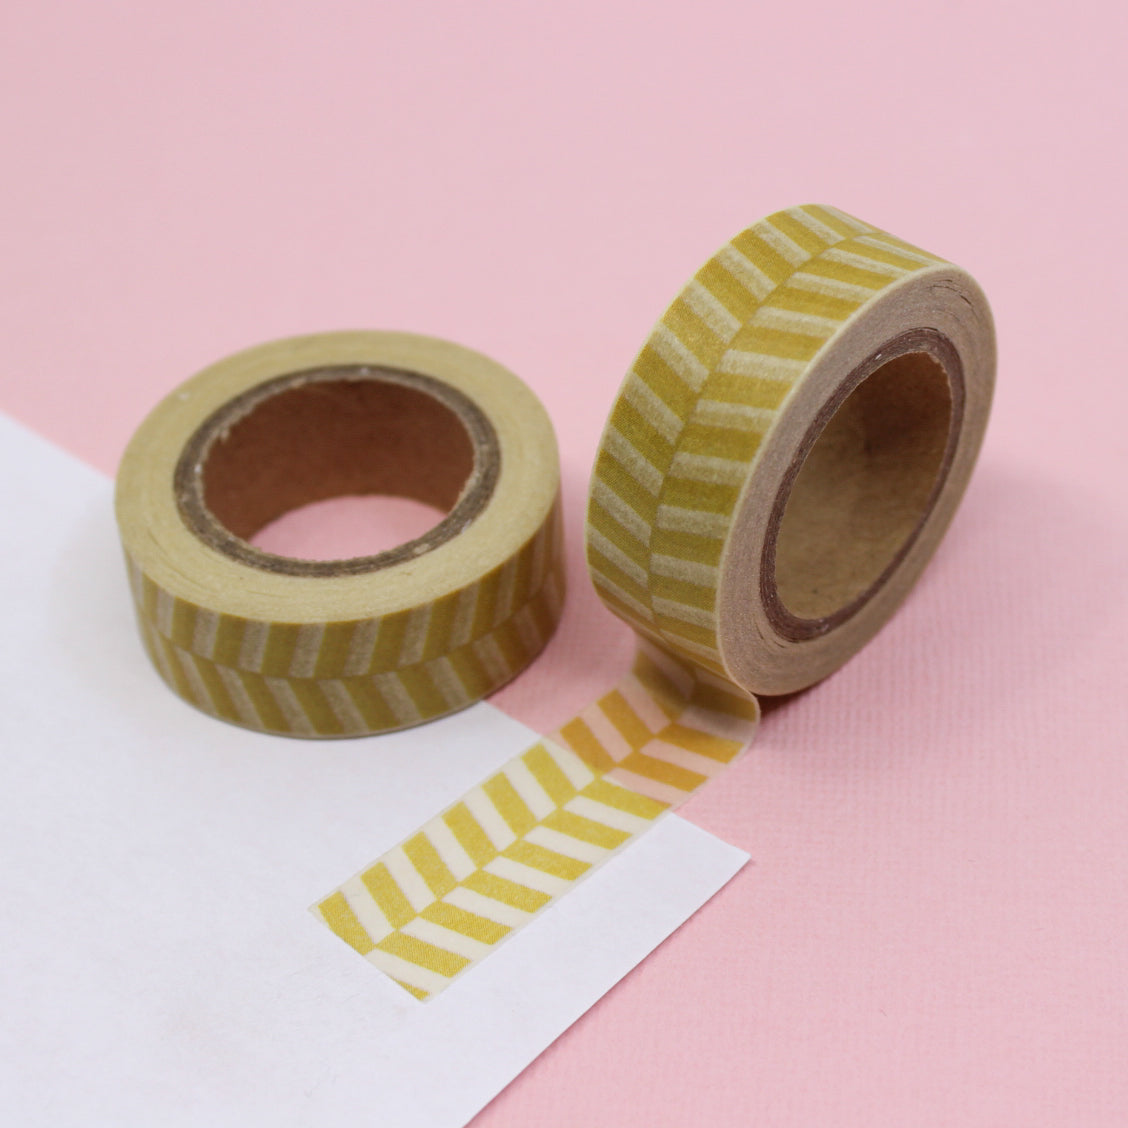 This fun and unique chevron pattern resembles a zipper. It will make a super cute addition to your washi collection. We sell this style of chevron tape in Yellow, brown and grey in our shop. This tape is sold at BBB Supplies Craft Shop.